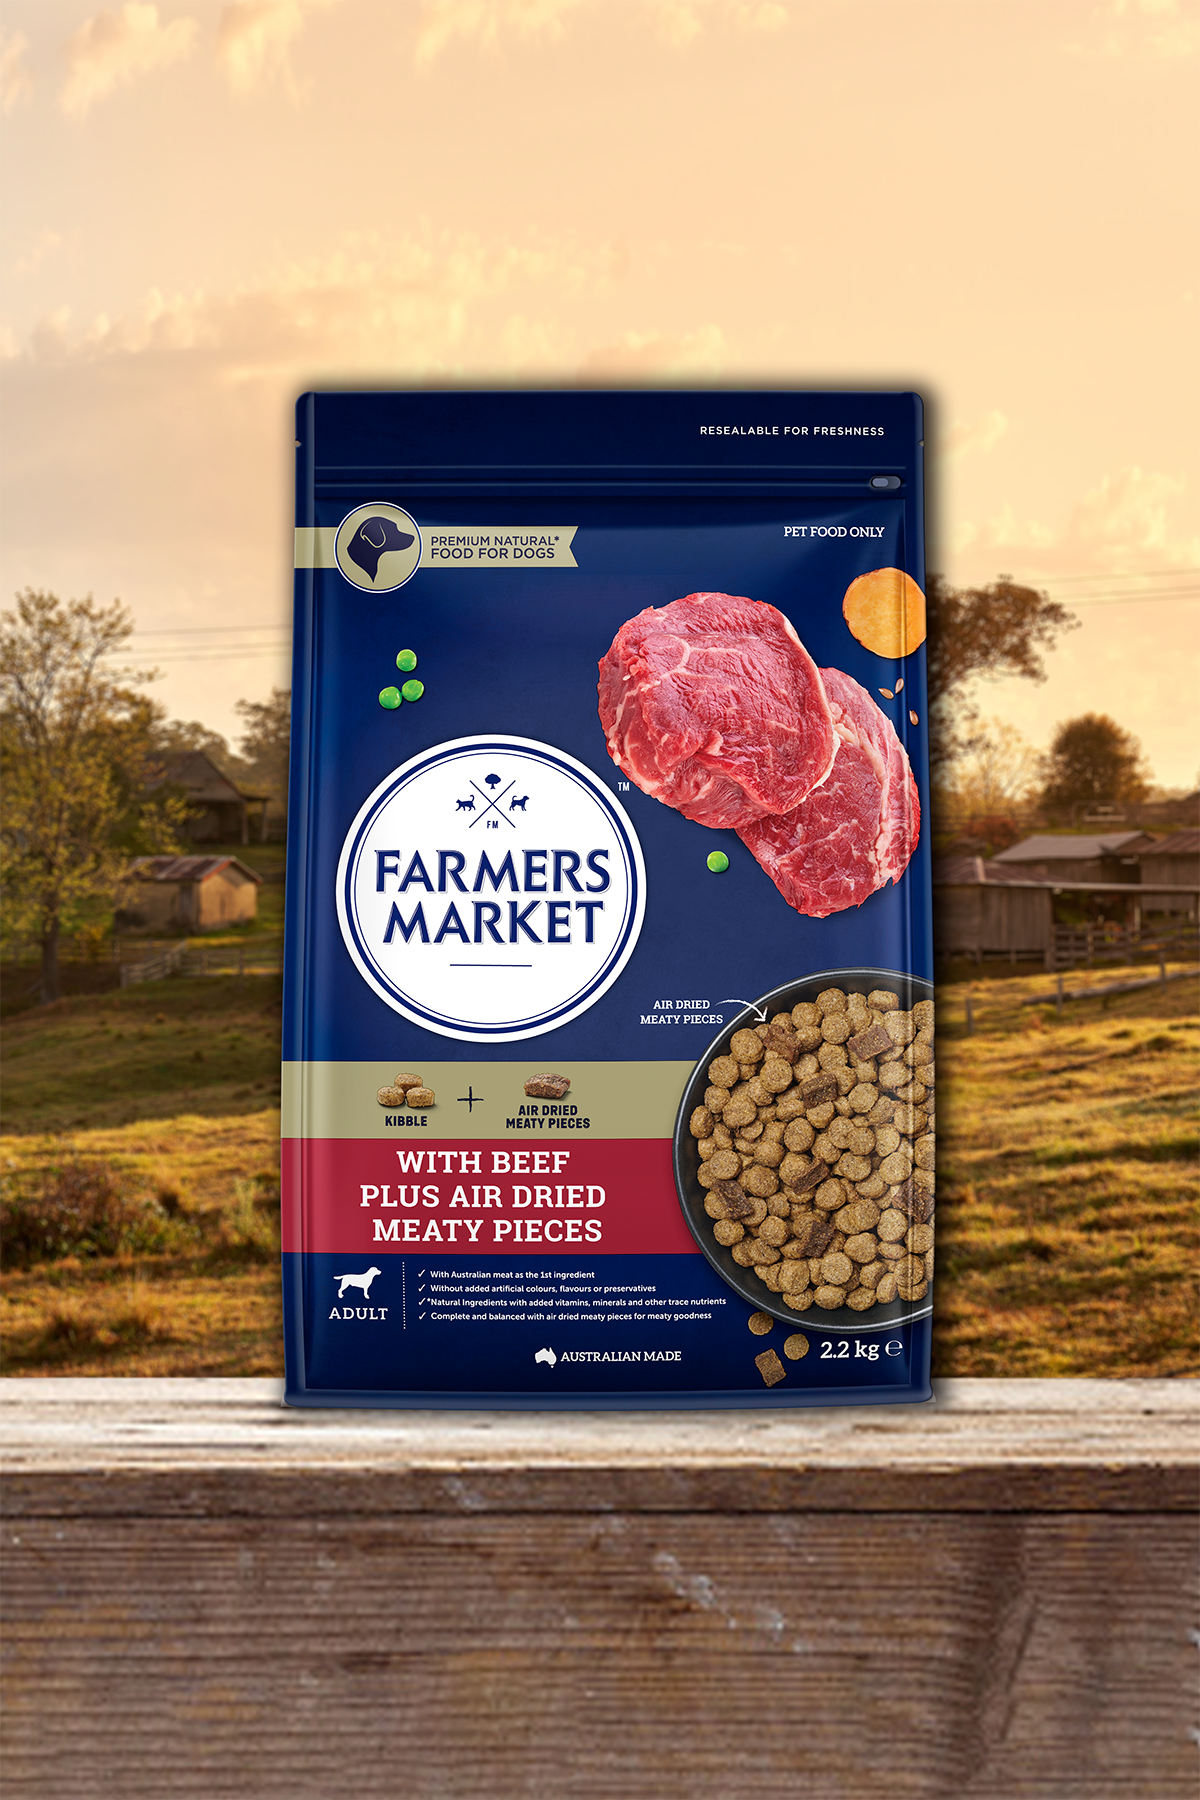 From paddock to plate – a new<br>brand of fresher food.